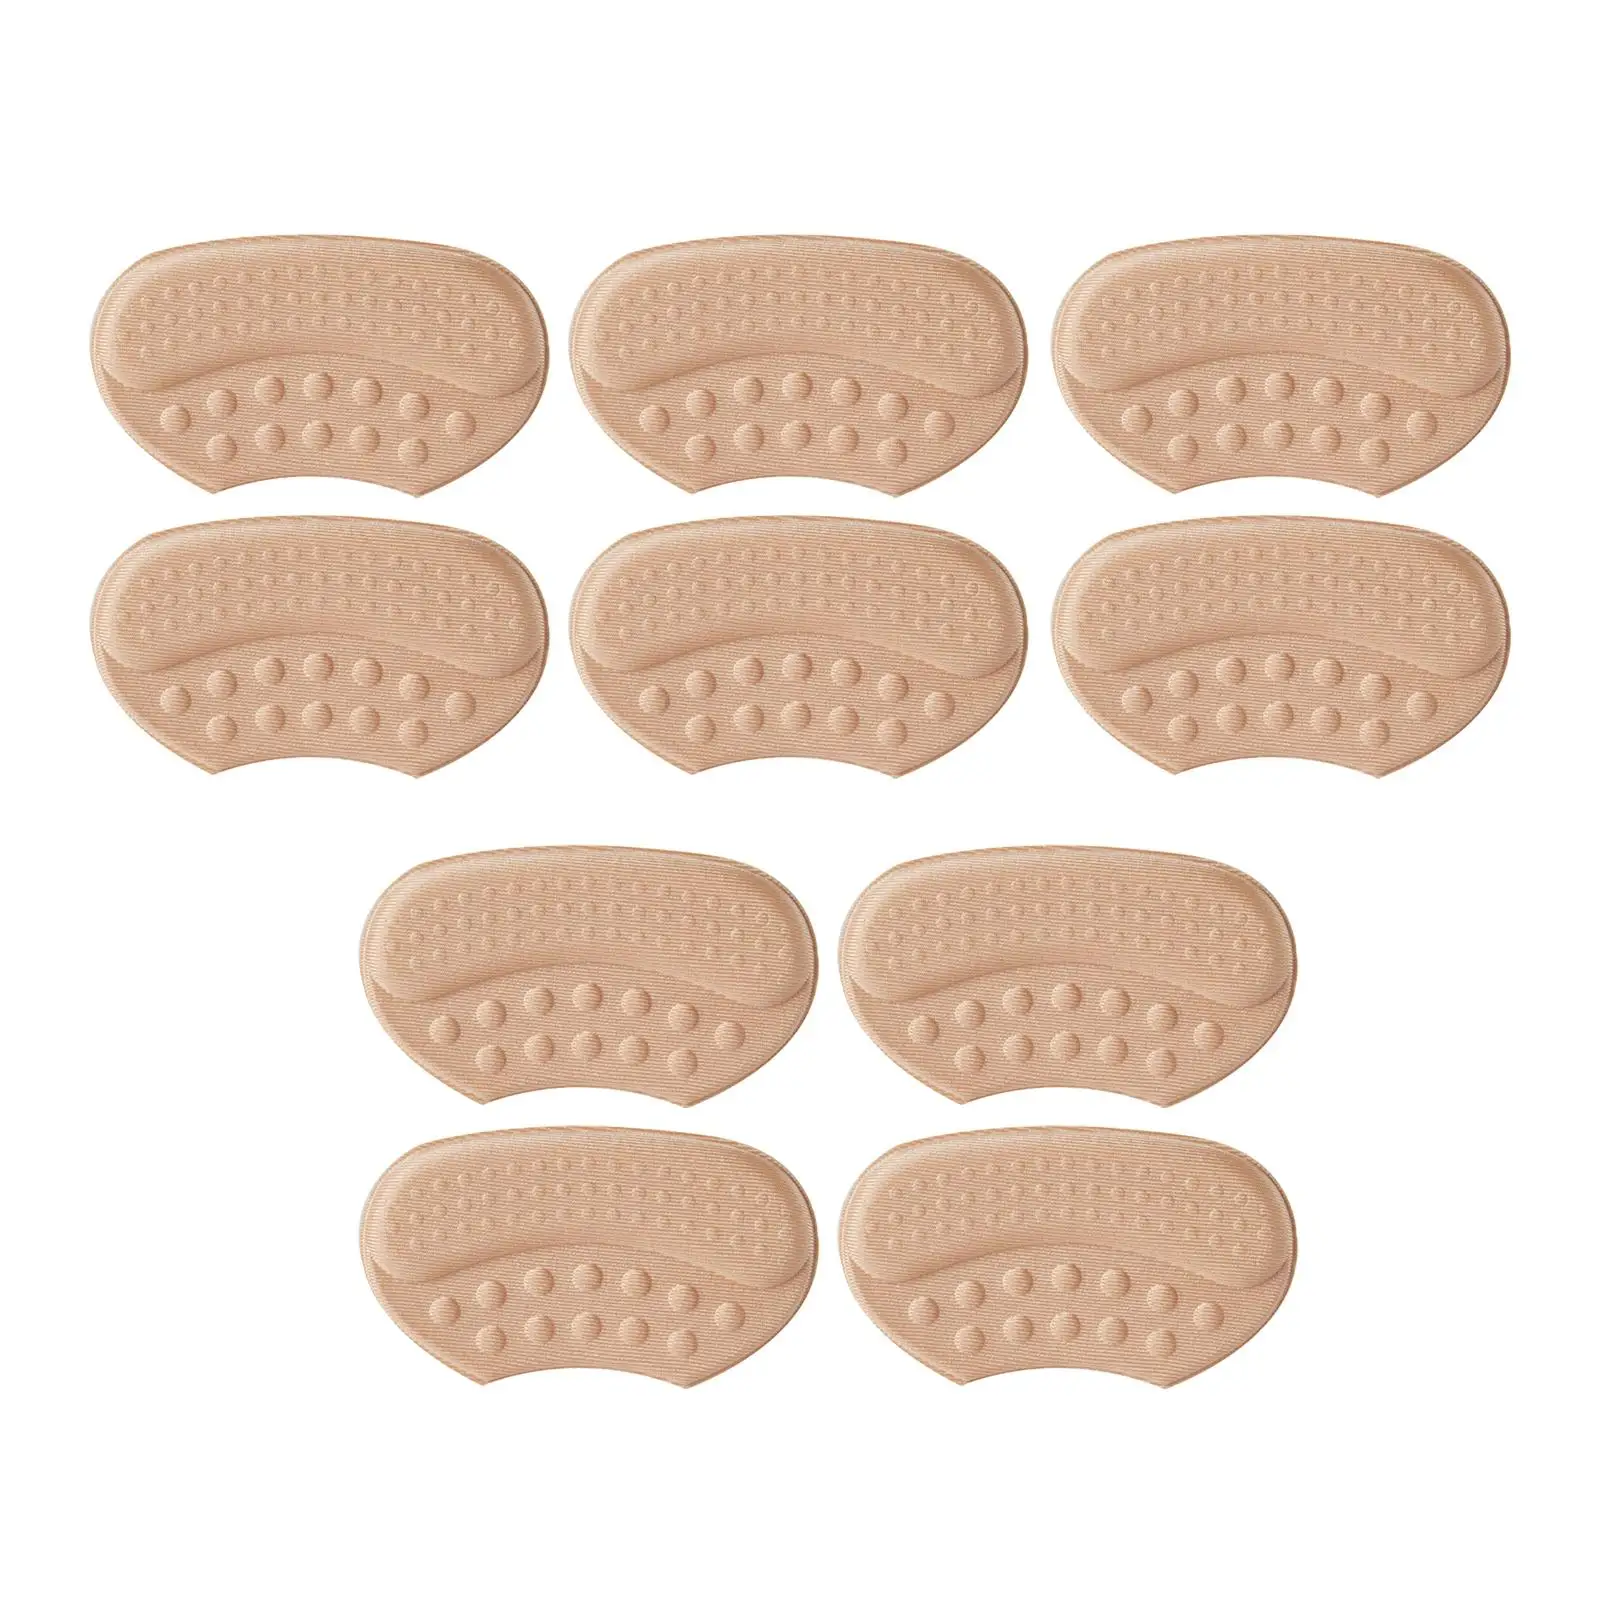 High Heels Cushion Pads High Heel Protectors Heel Liner Cushions Inserts for Sports